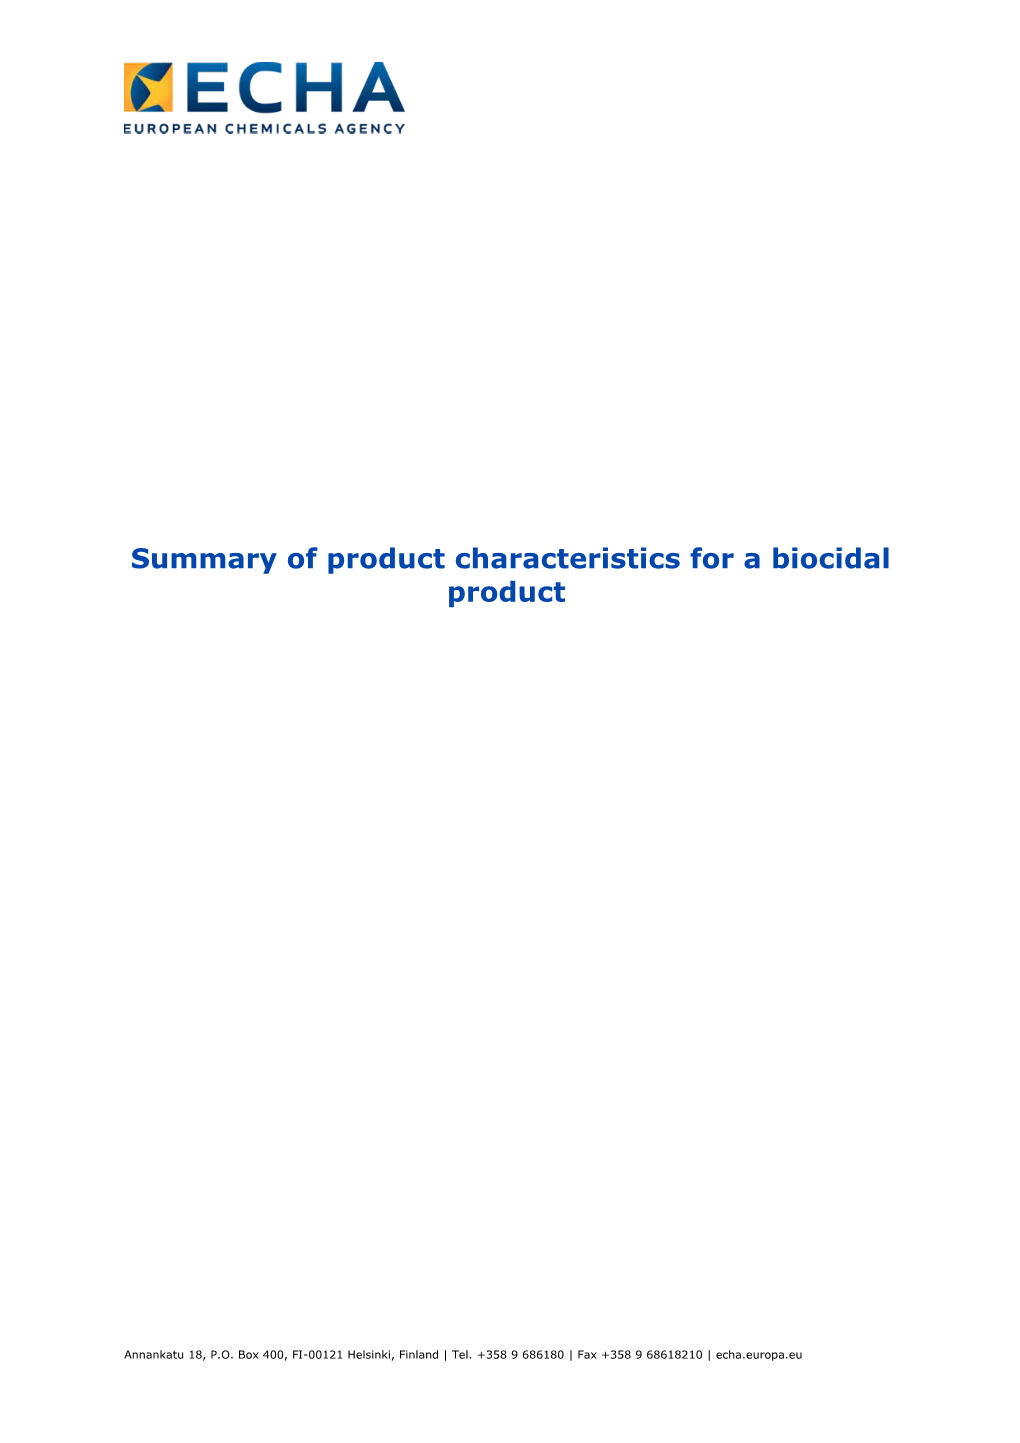 Summary of Product Characteristics for a Biocidal Product